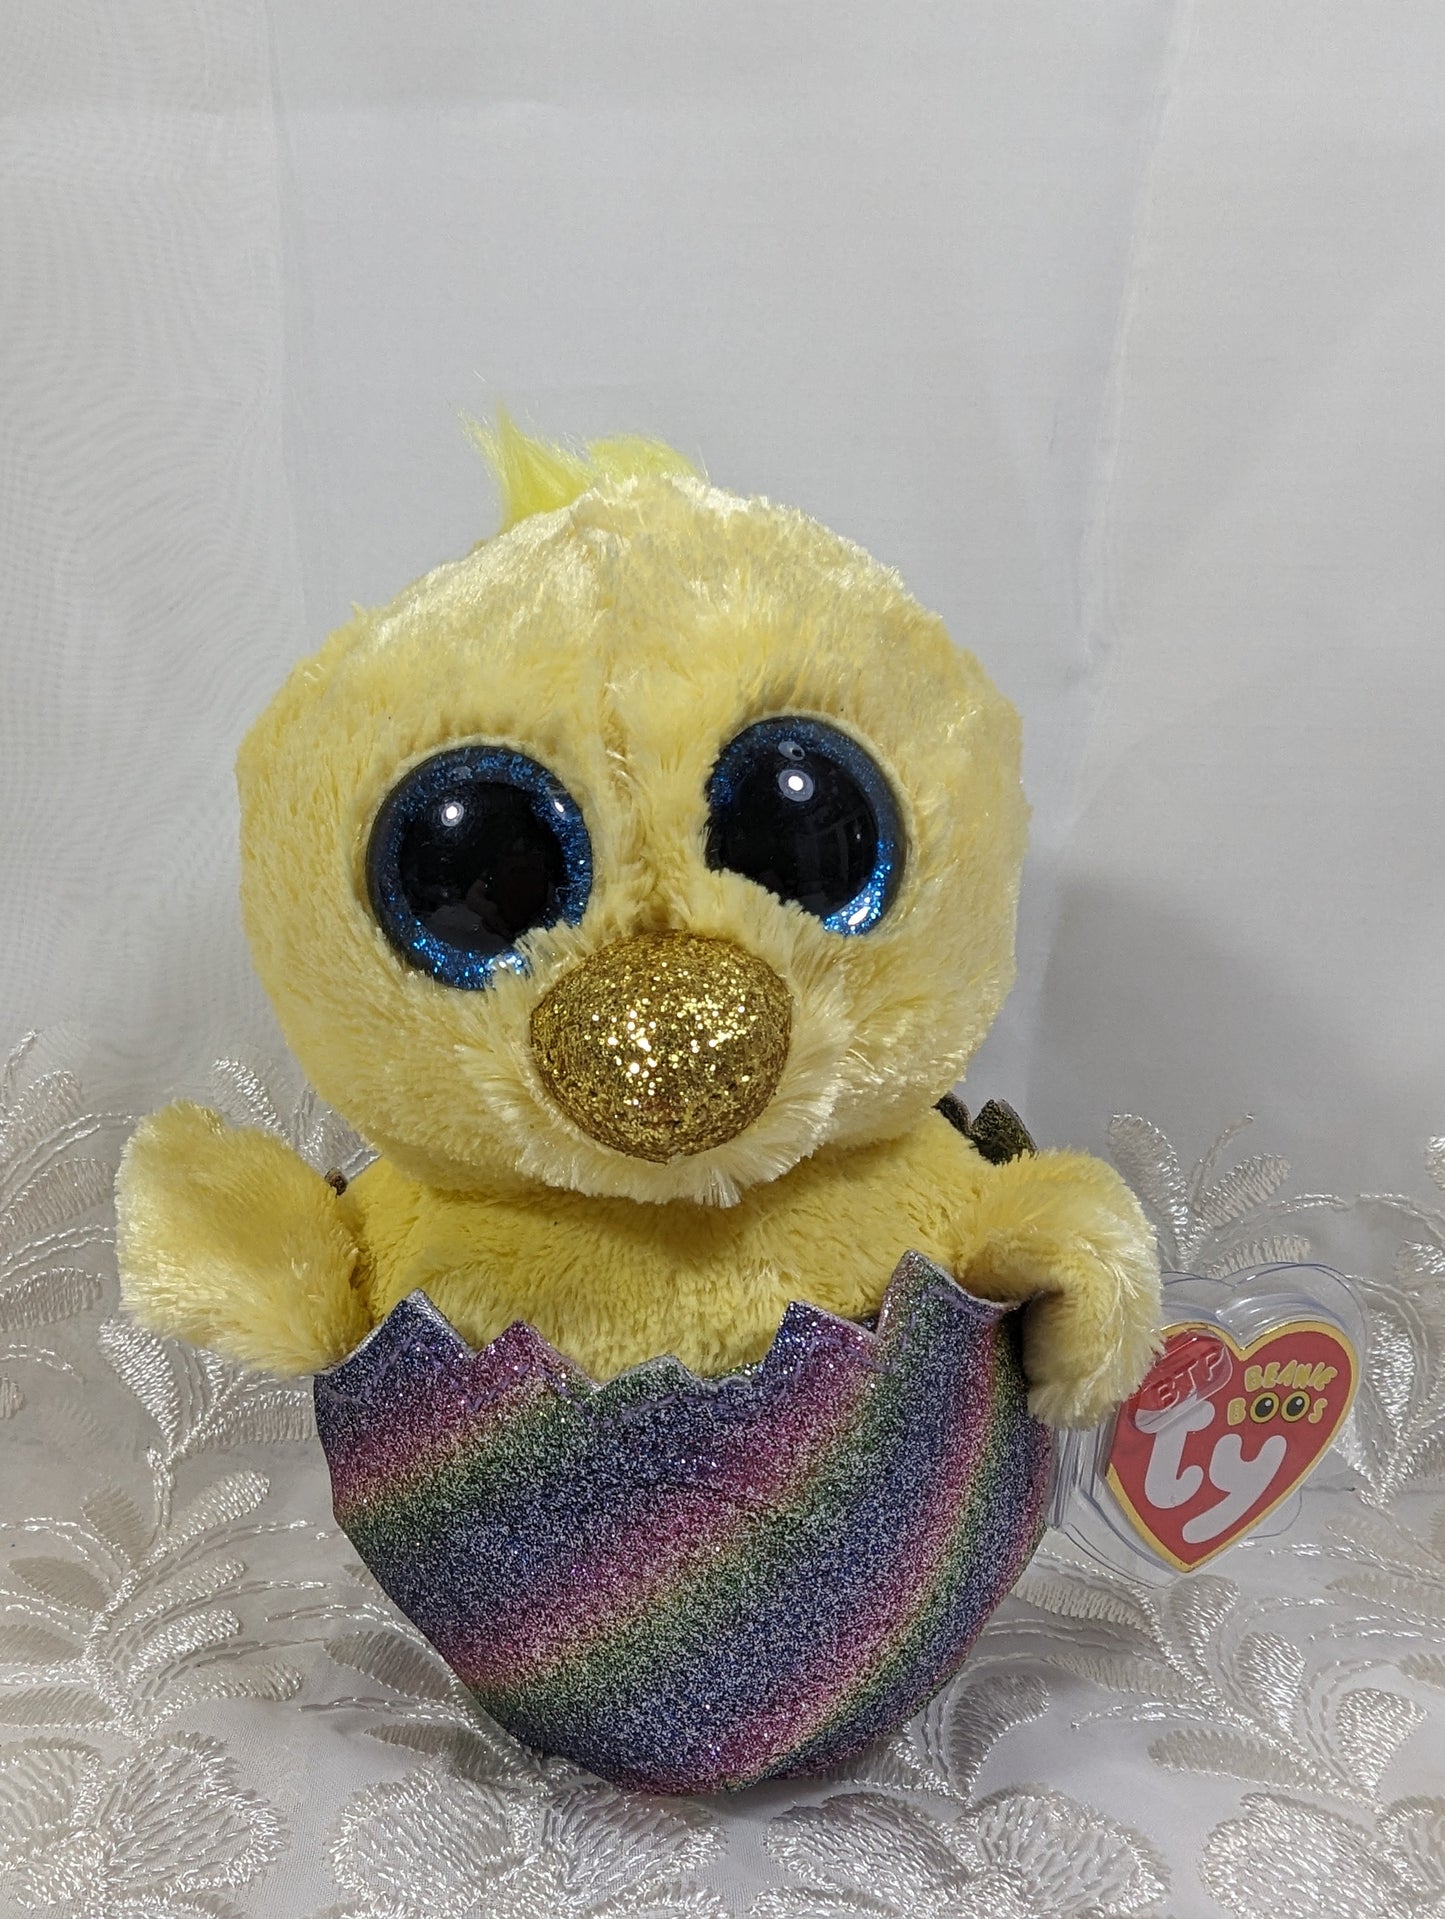 Ty Beanie Boo - Megg The Yellow Chick (6in) - Vintage Beanies Canada